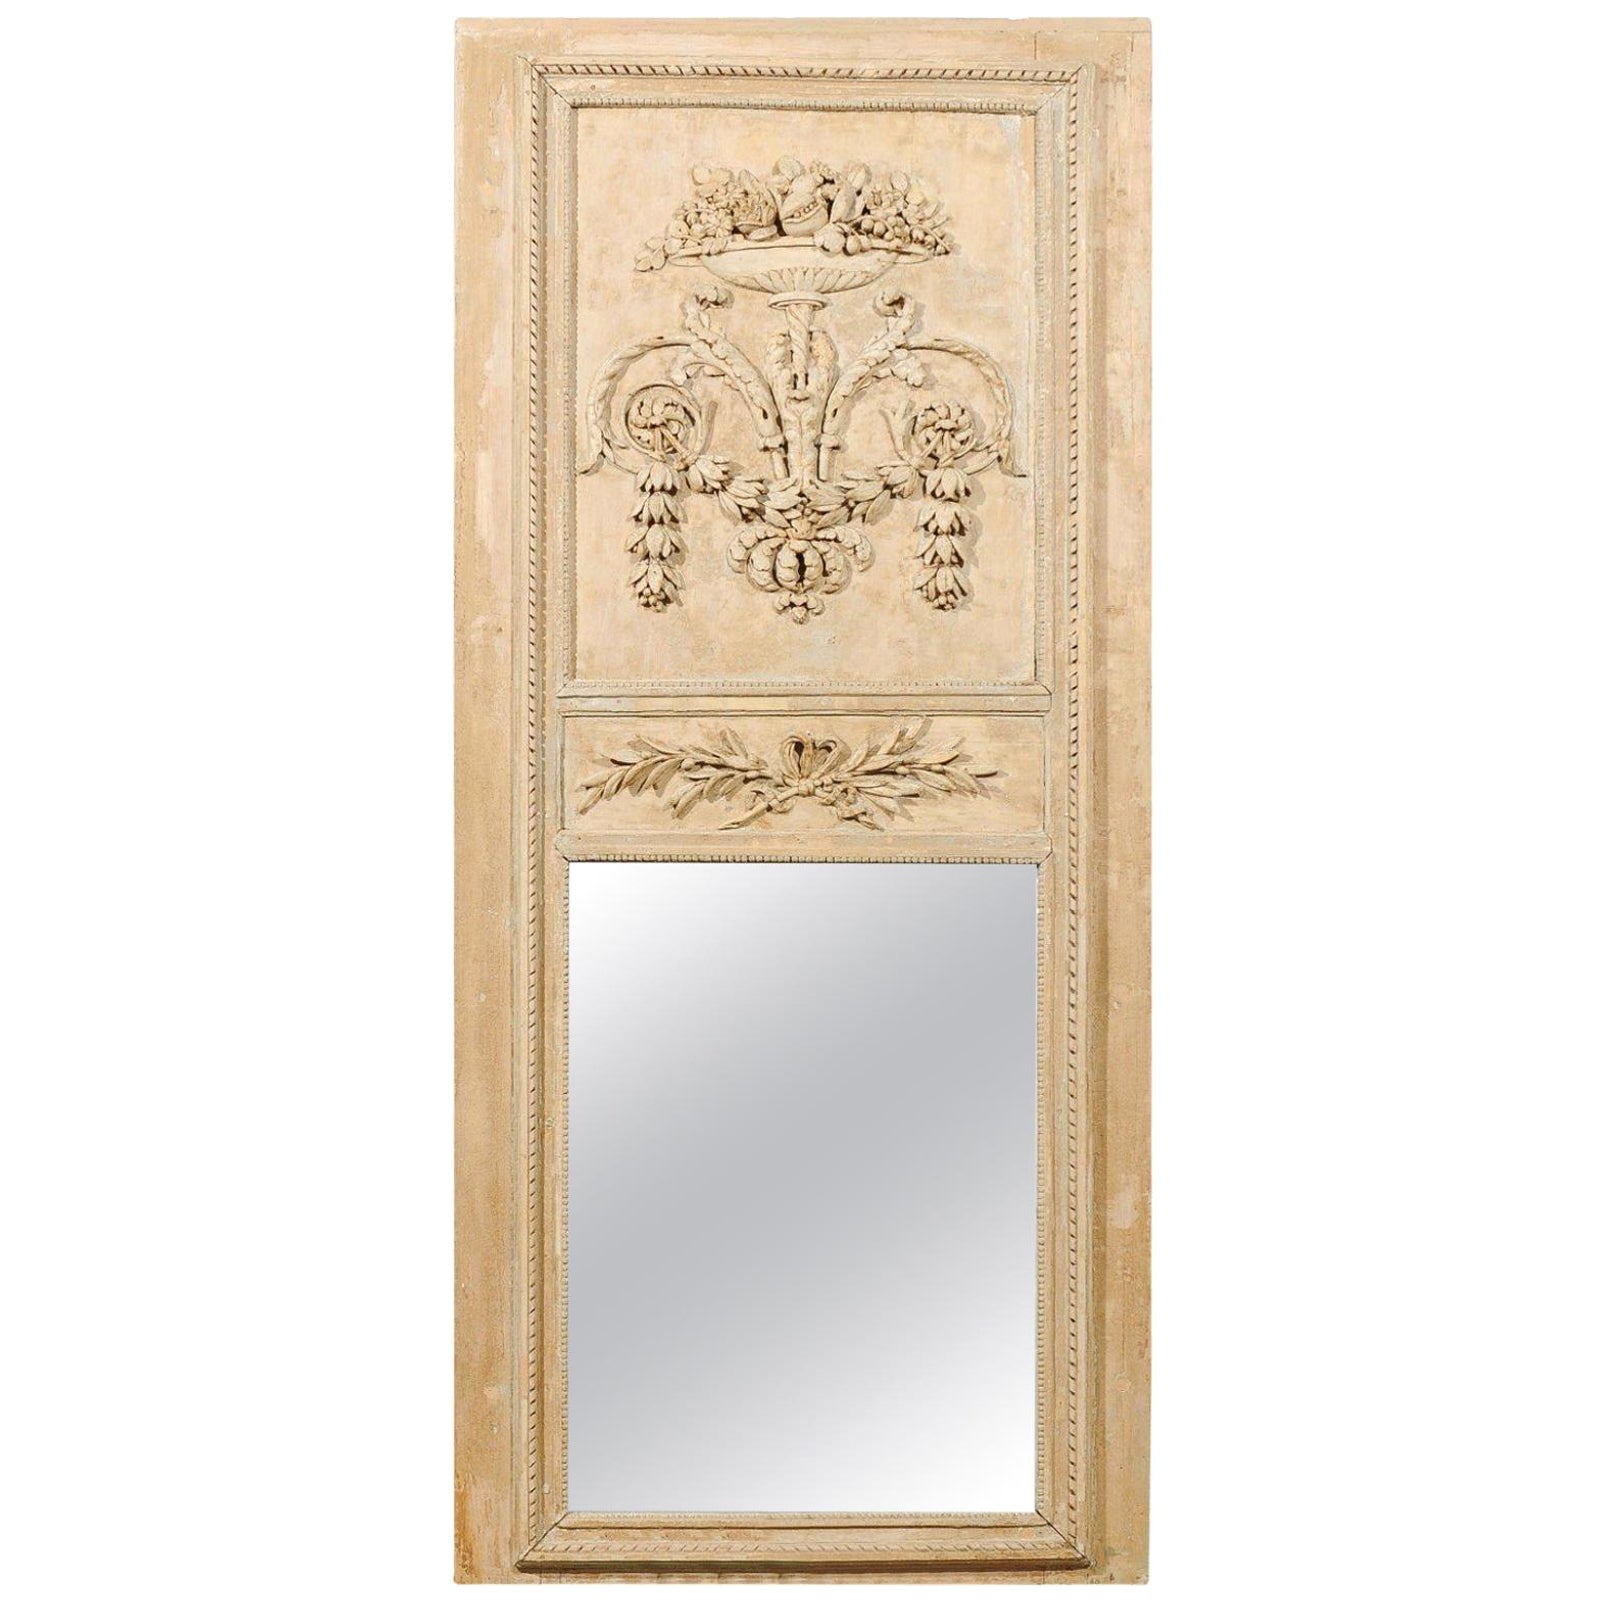 French Louis XVI Period 1790s Painted Wood Trumeau Mirror with Scrollwork Motifs For Sale